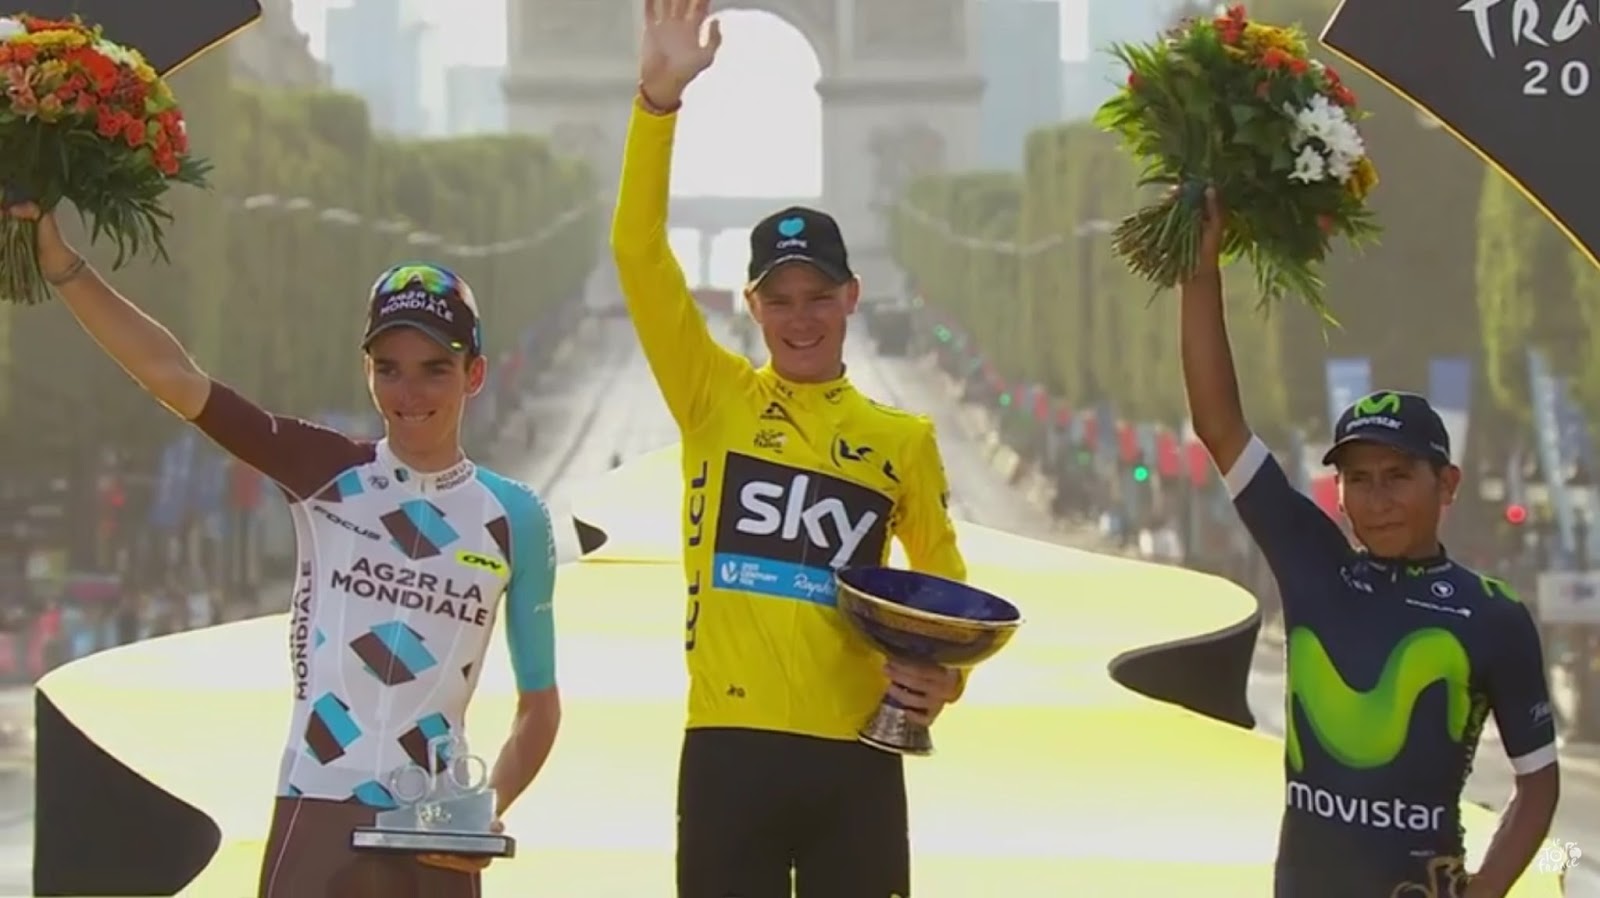 CHRIS FROOME 7